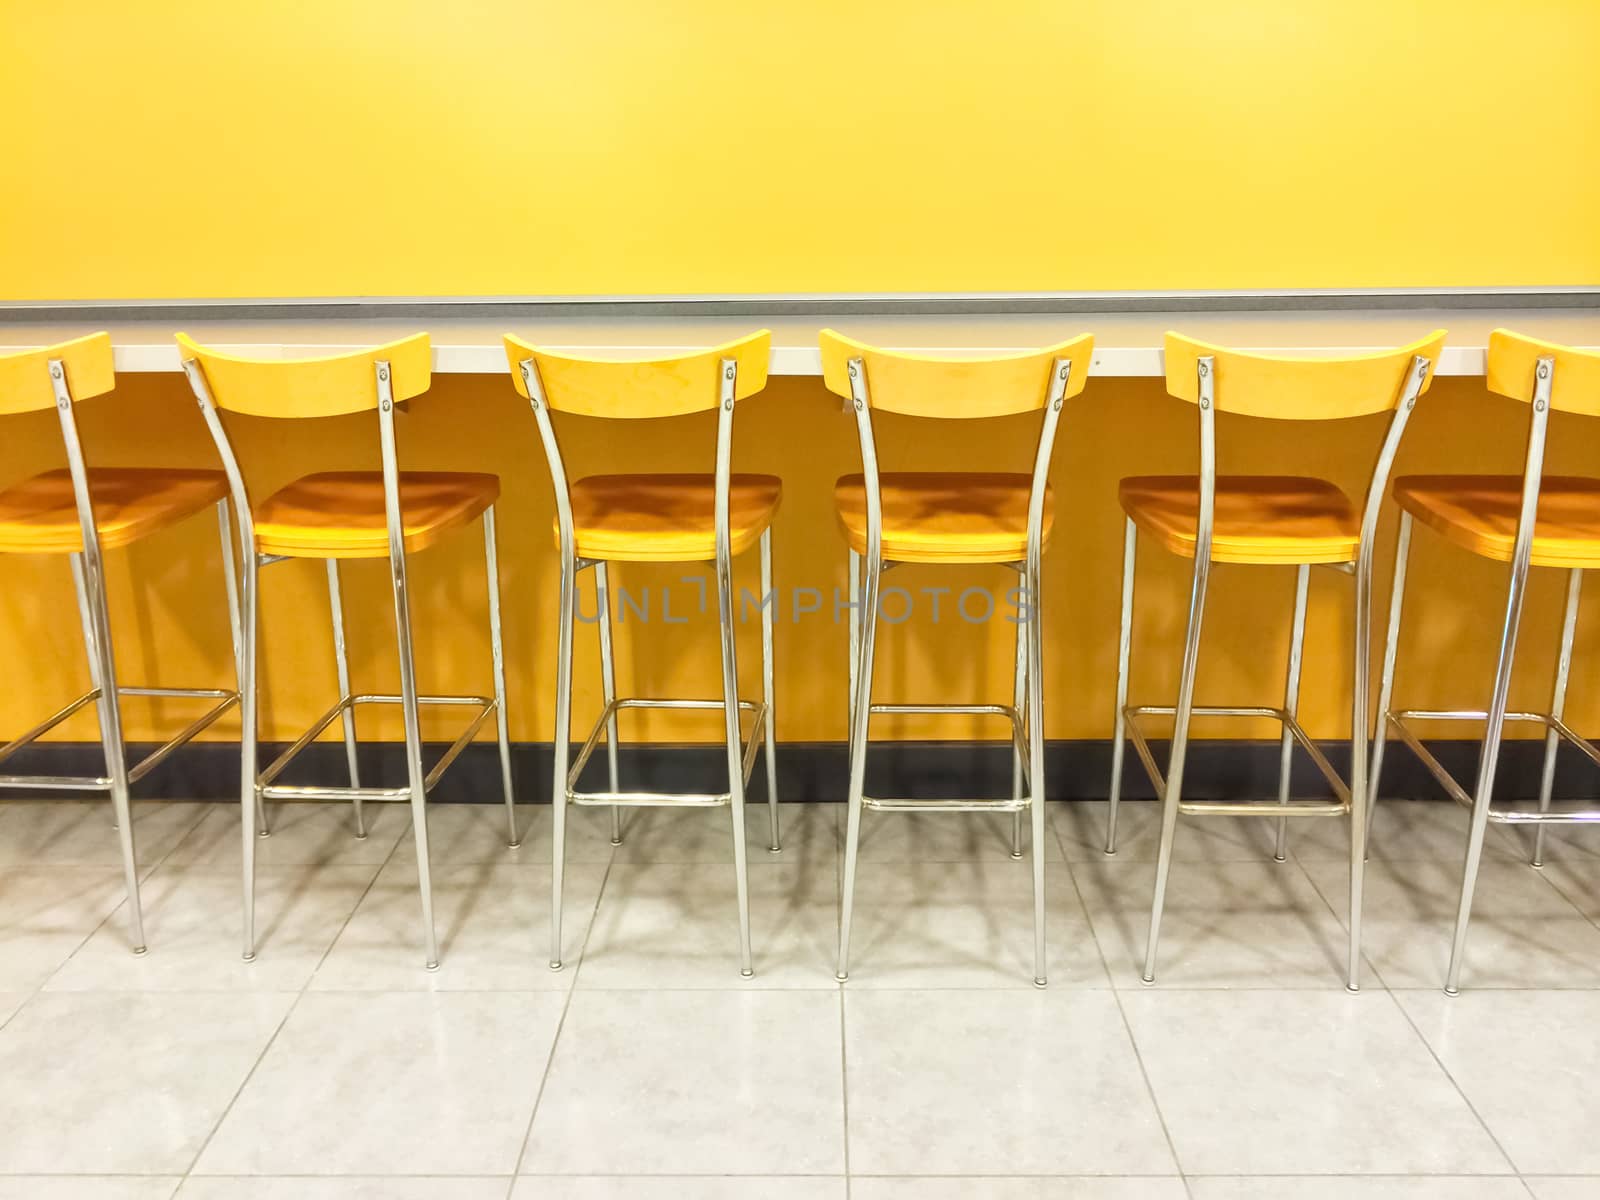 Raw of empty yellow chairs in a cafeteria.